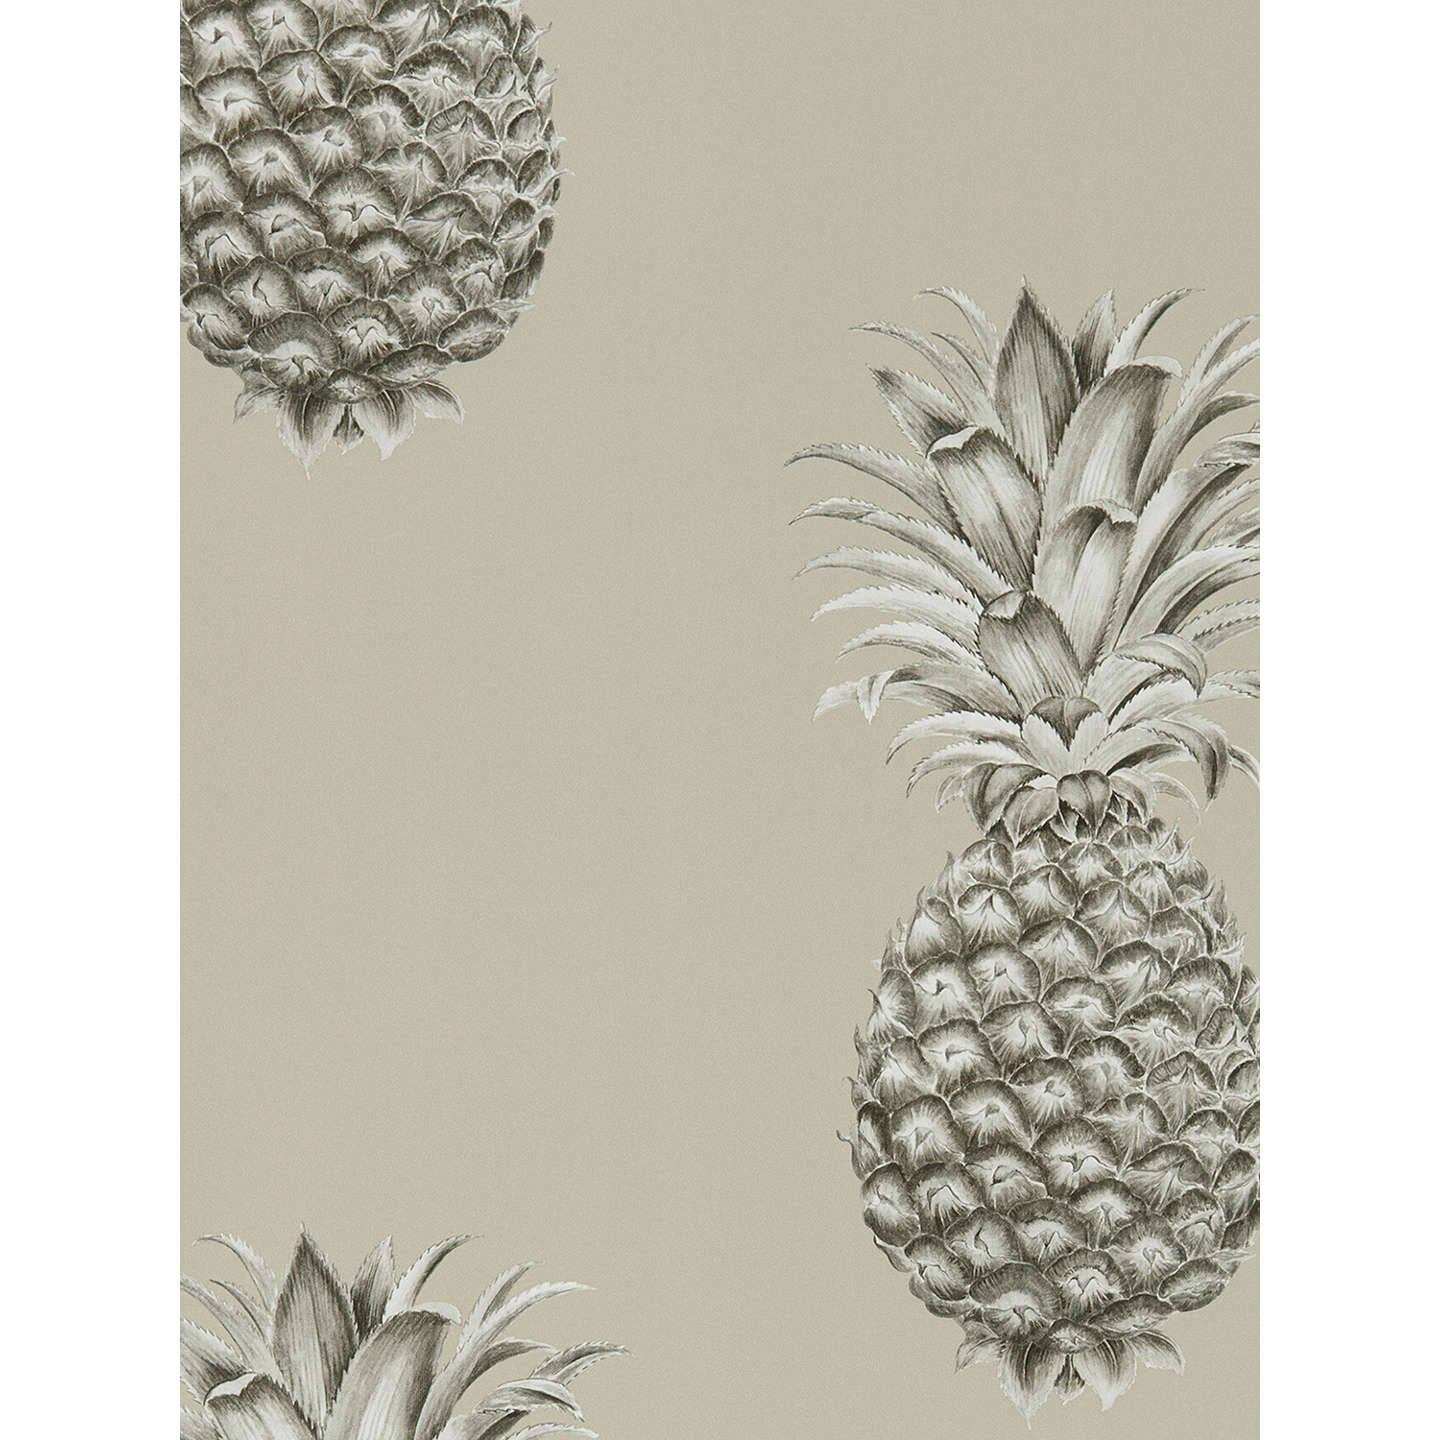 A close-up shot of a ripe Pineapple sending a reminder of a sweeter life Wallpaper